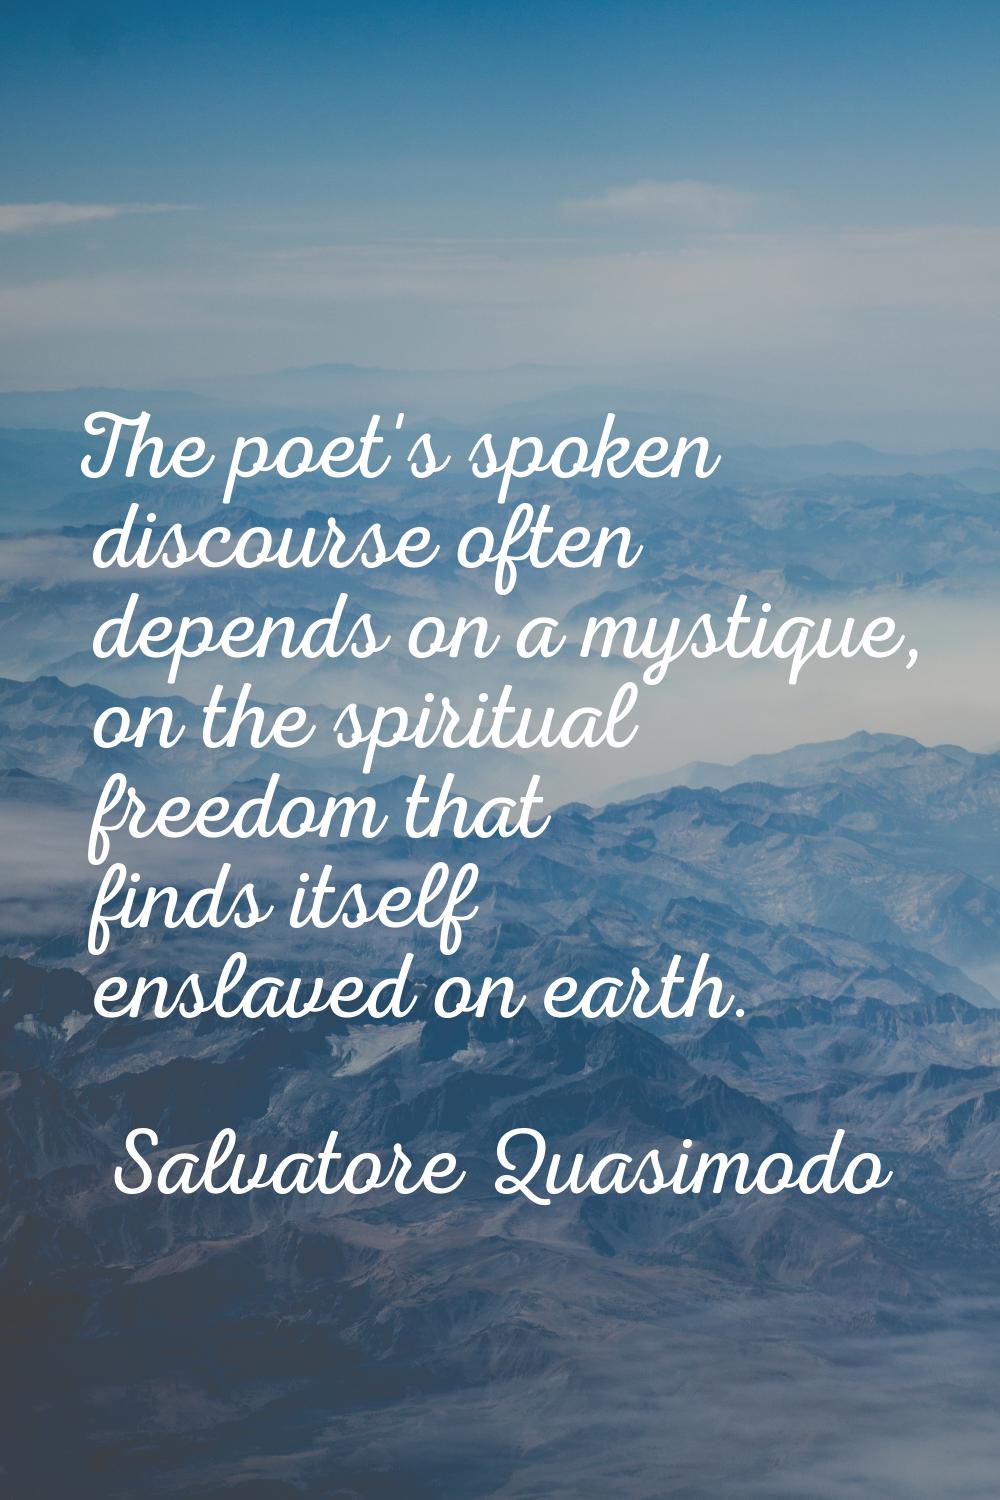 The poet's spoken discourse often depends on a mystique, on the spiritual freedom that finds itself